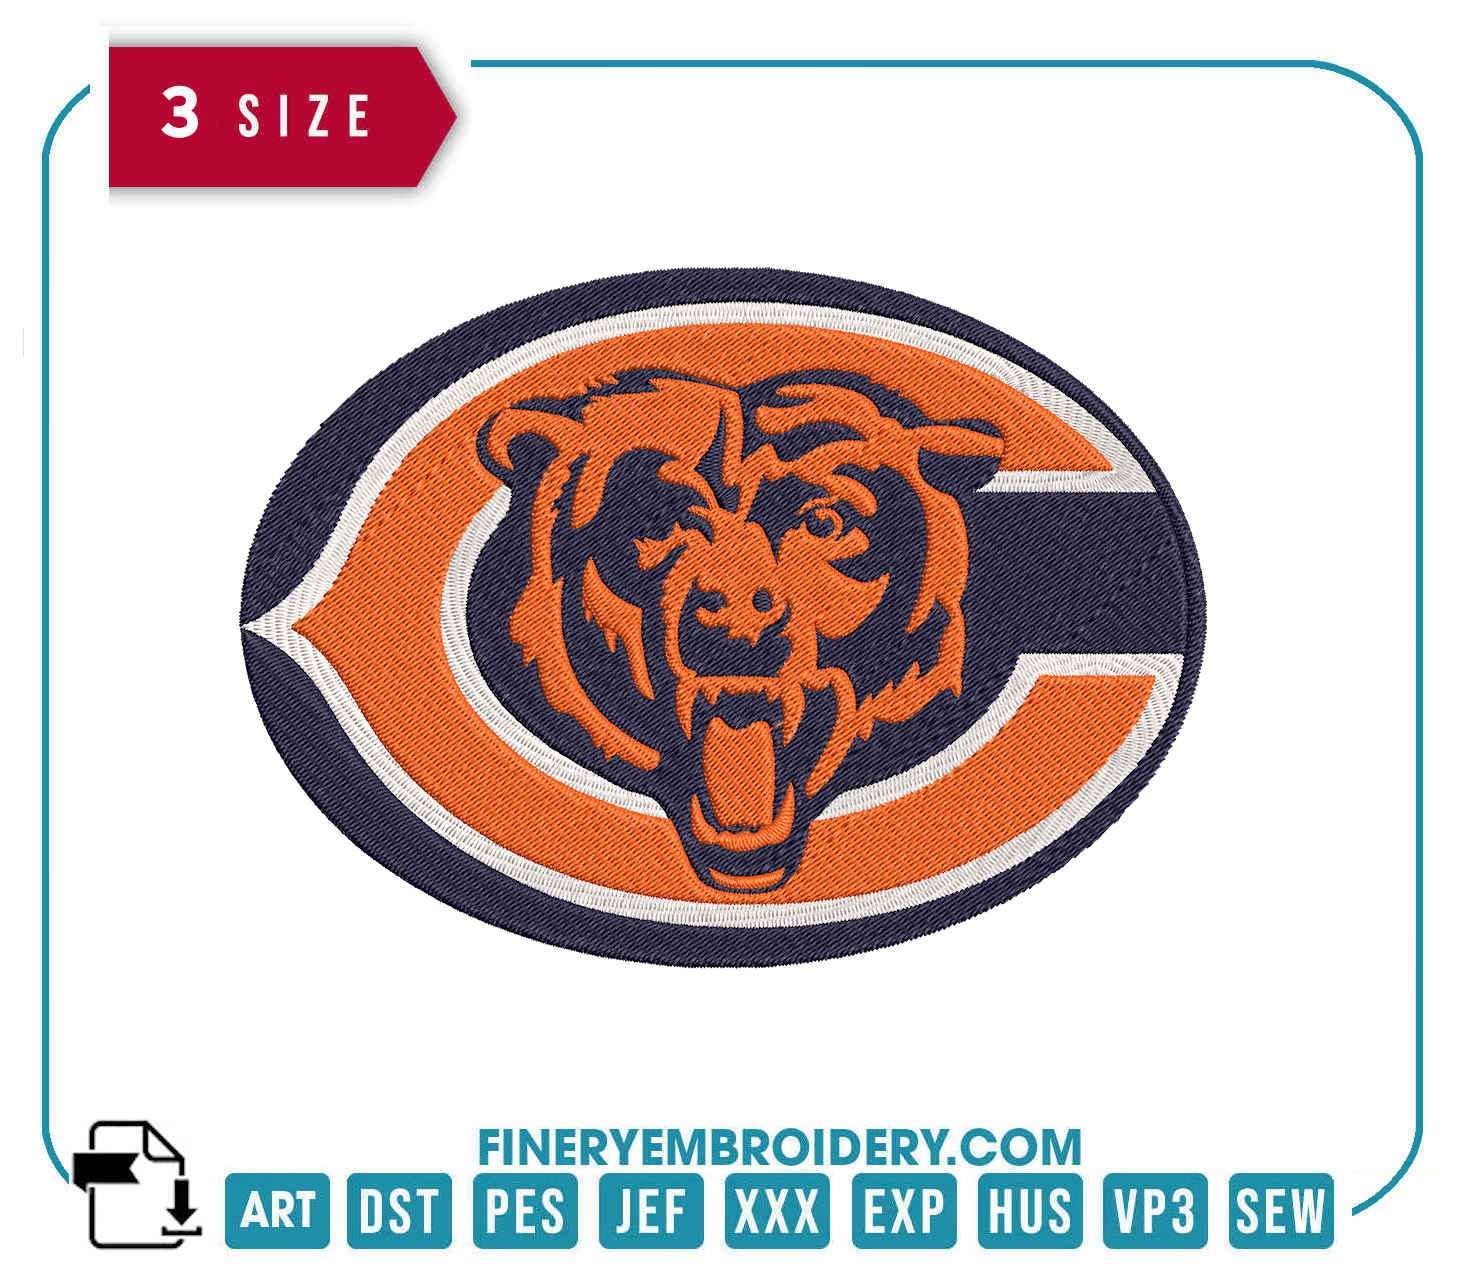 Chicago Bears Embroidery Design 4 - FineryEmbroidery